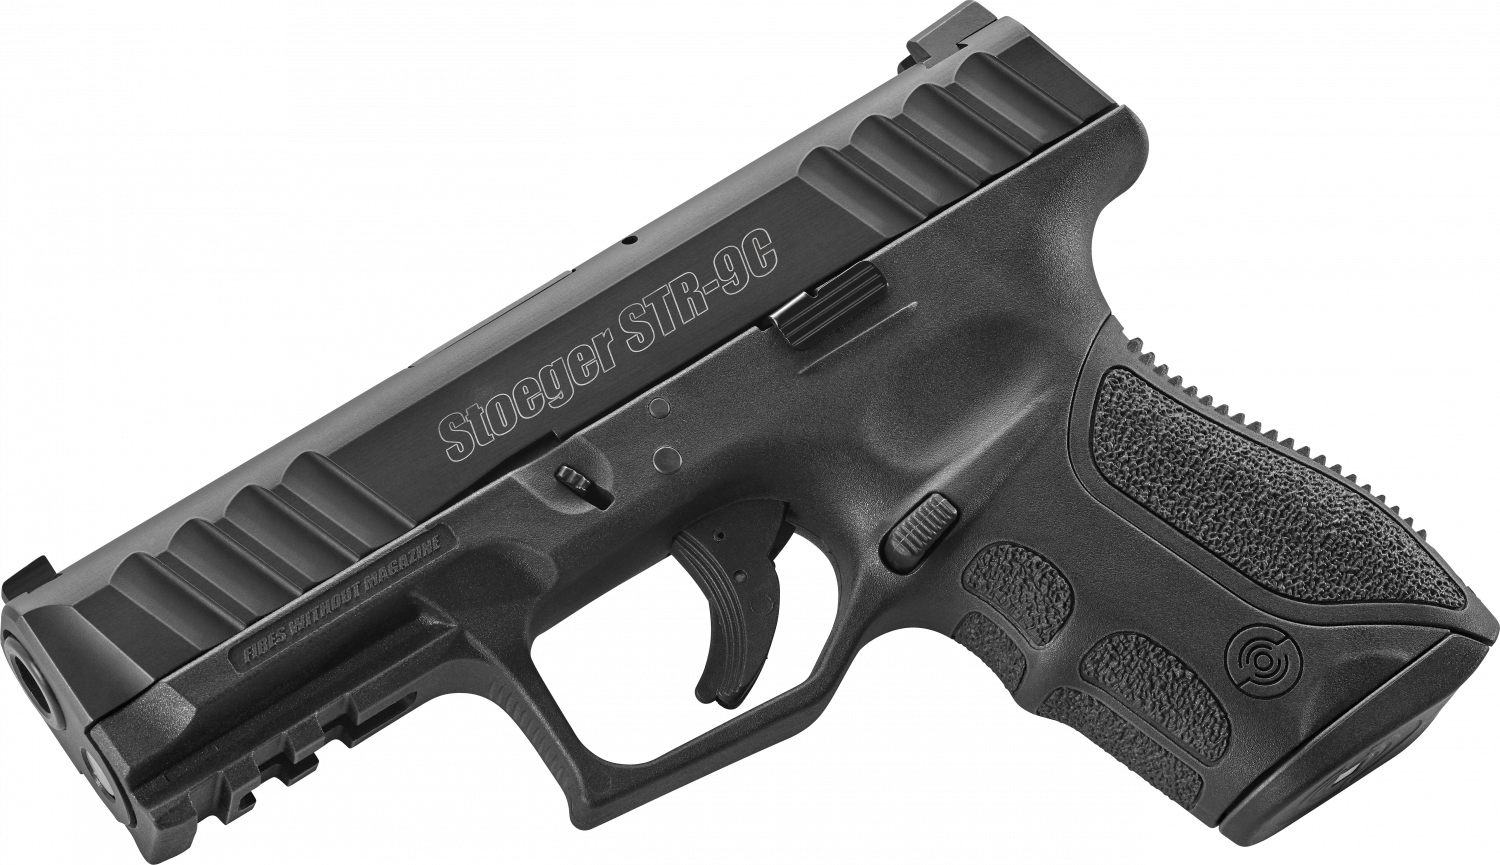 stoeger-str-9-pistol-line-expands-with-compact-model-the-firearm-blog